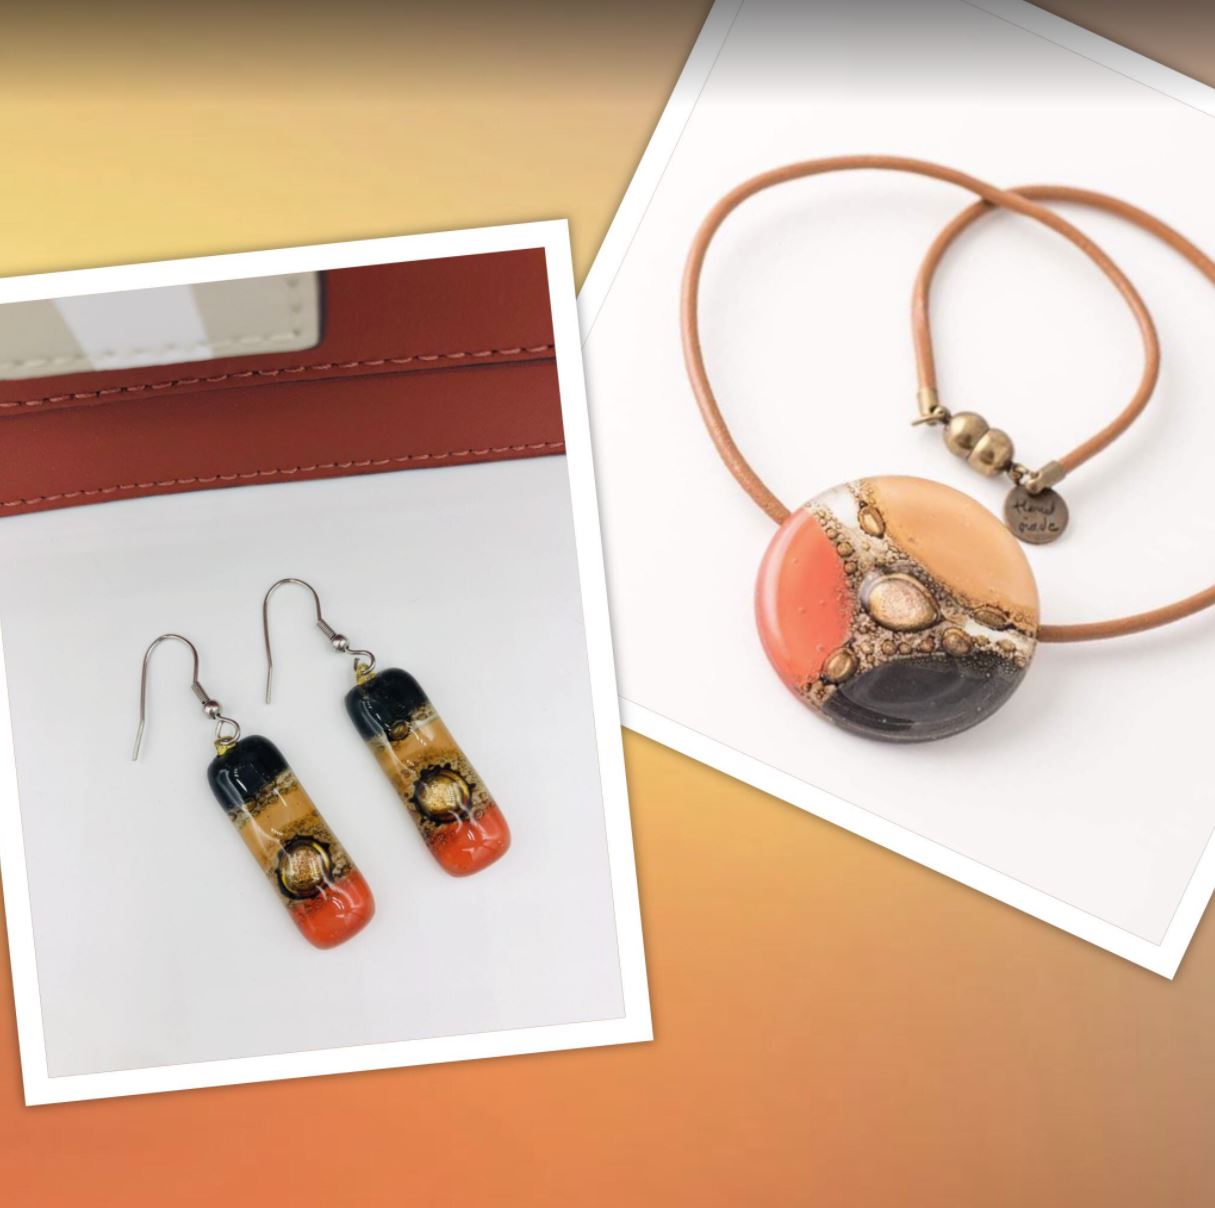 necklace and earring set. The orange and black fashion jewellery set is made of fused glass and a leather cord. Best gift idea for her.